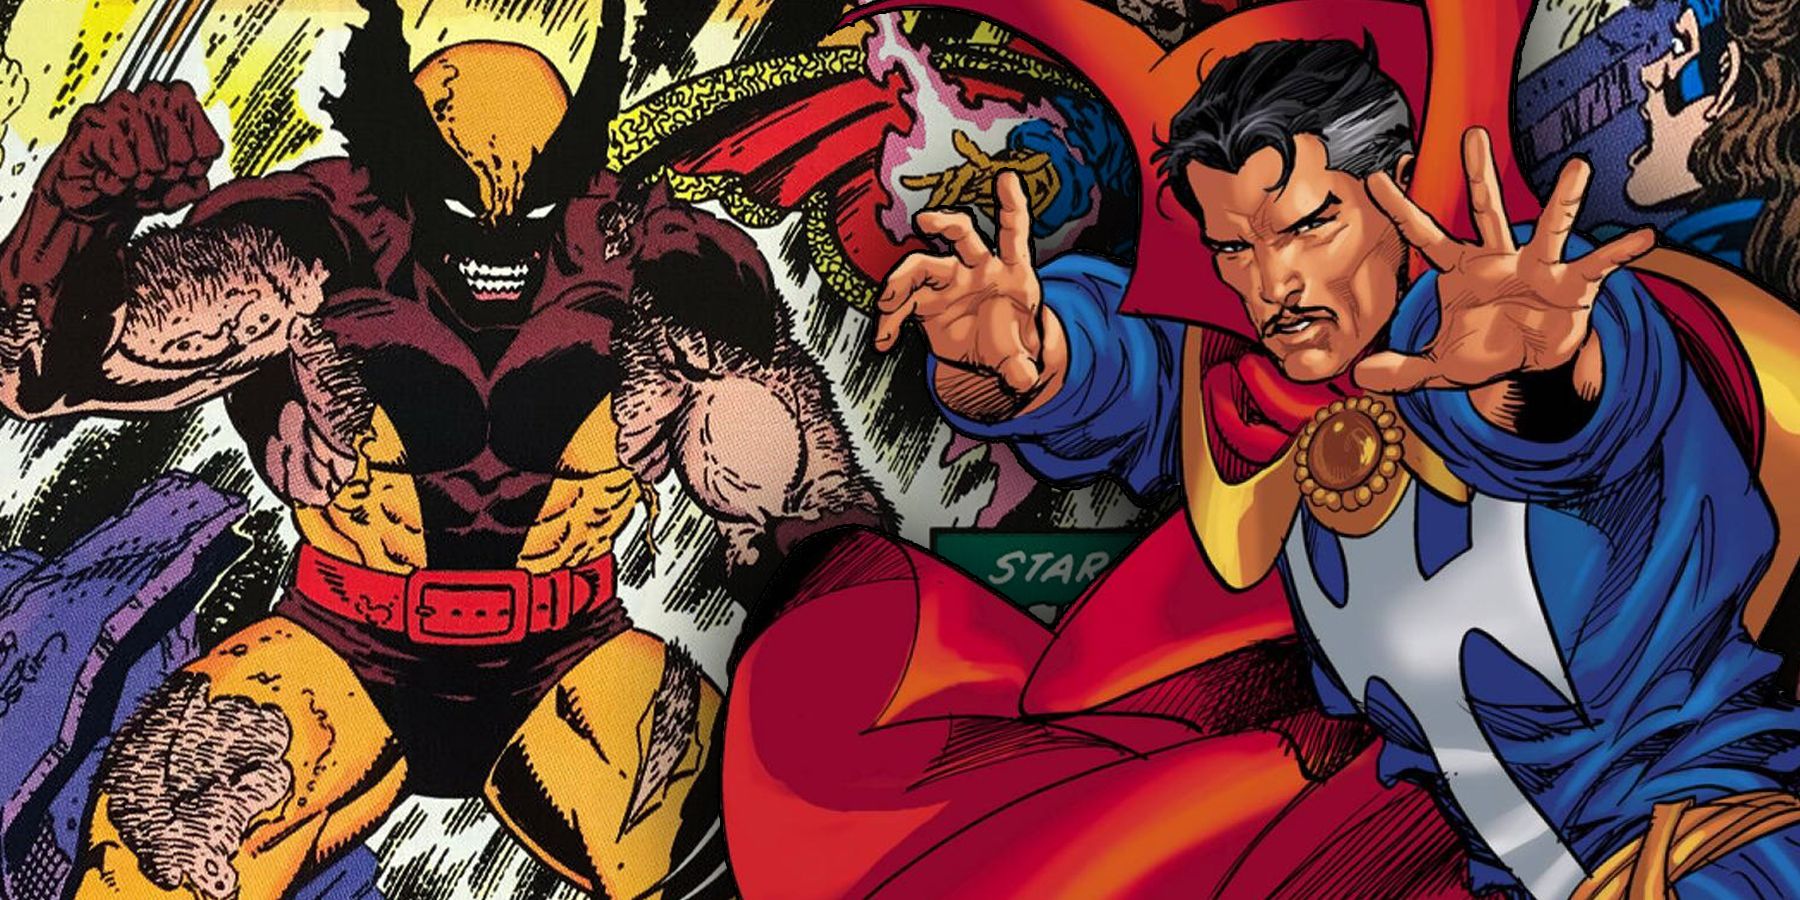 An angry Wolverine is ready to fight, with Doctor Strange posing in the foreground.